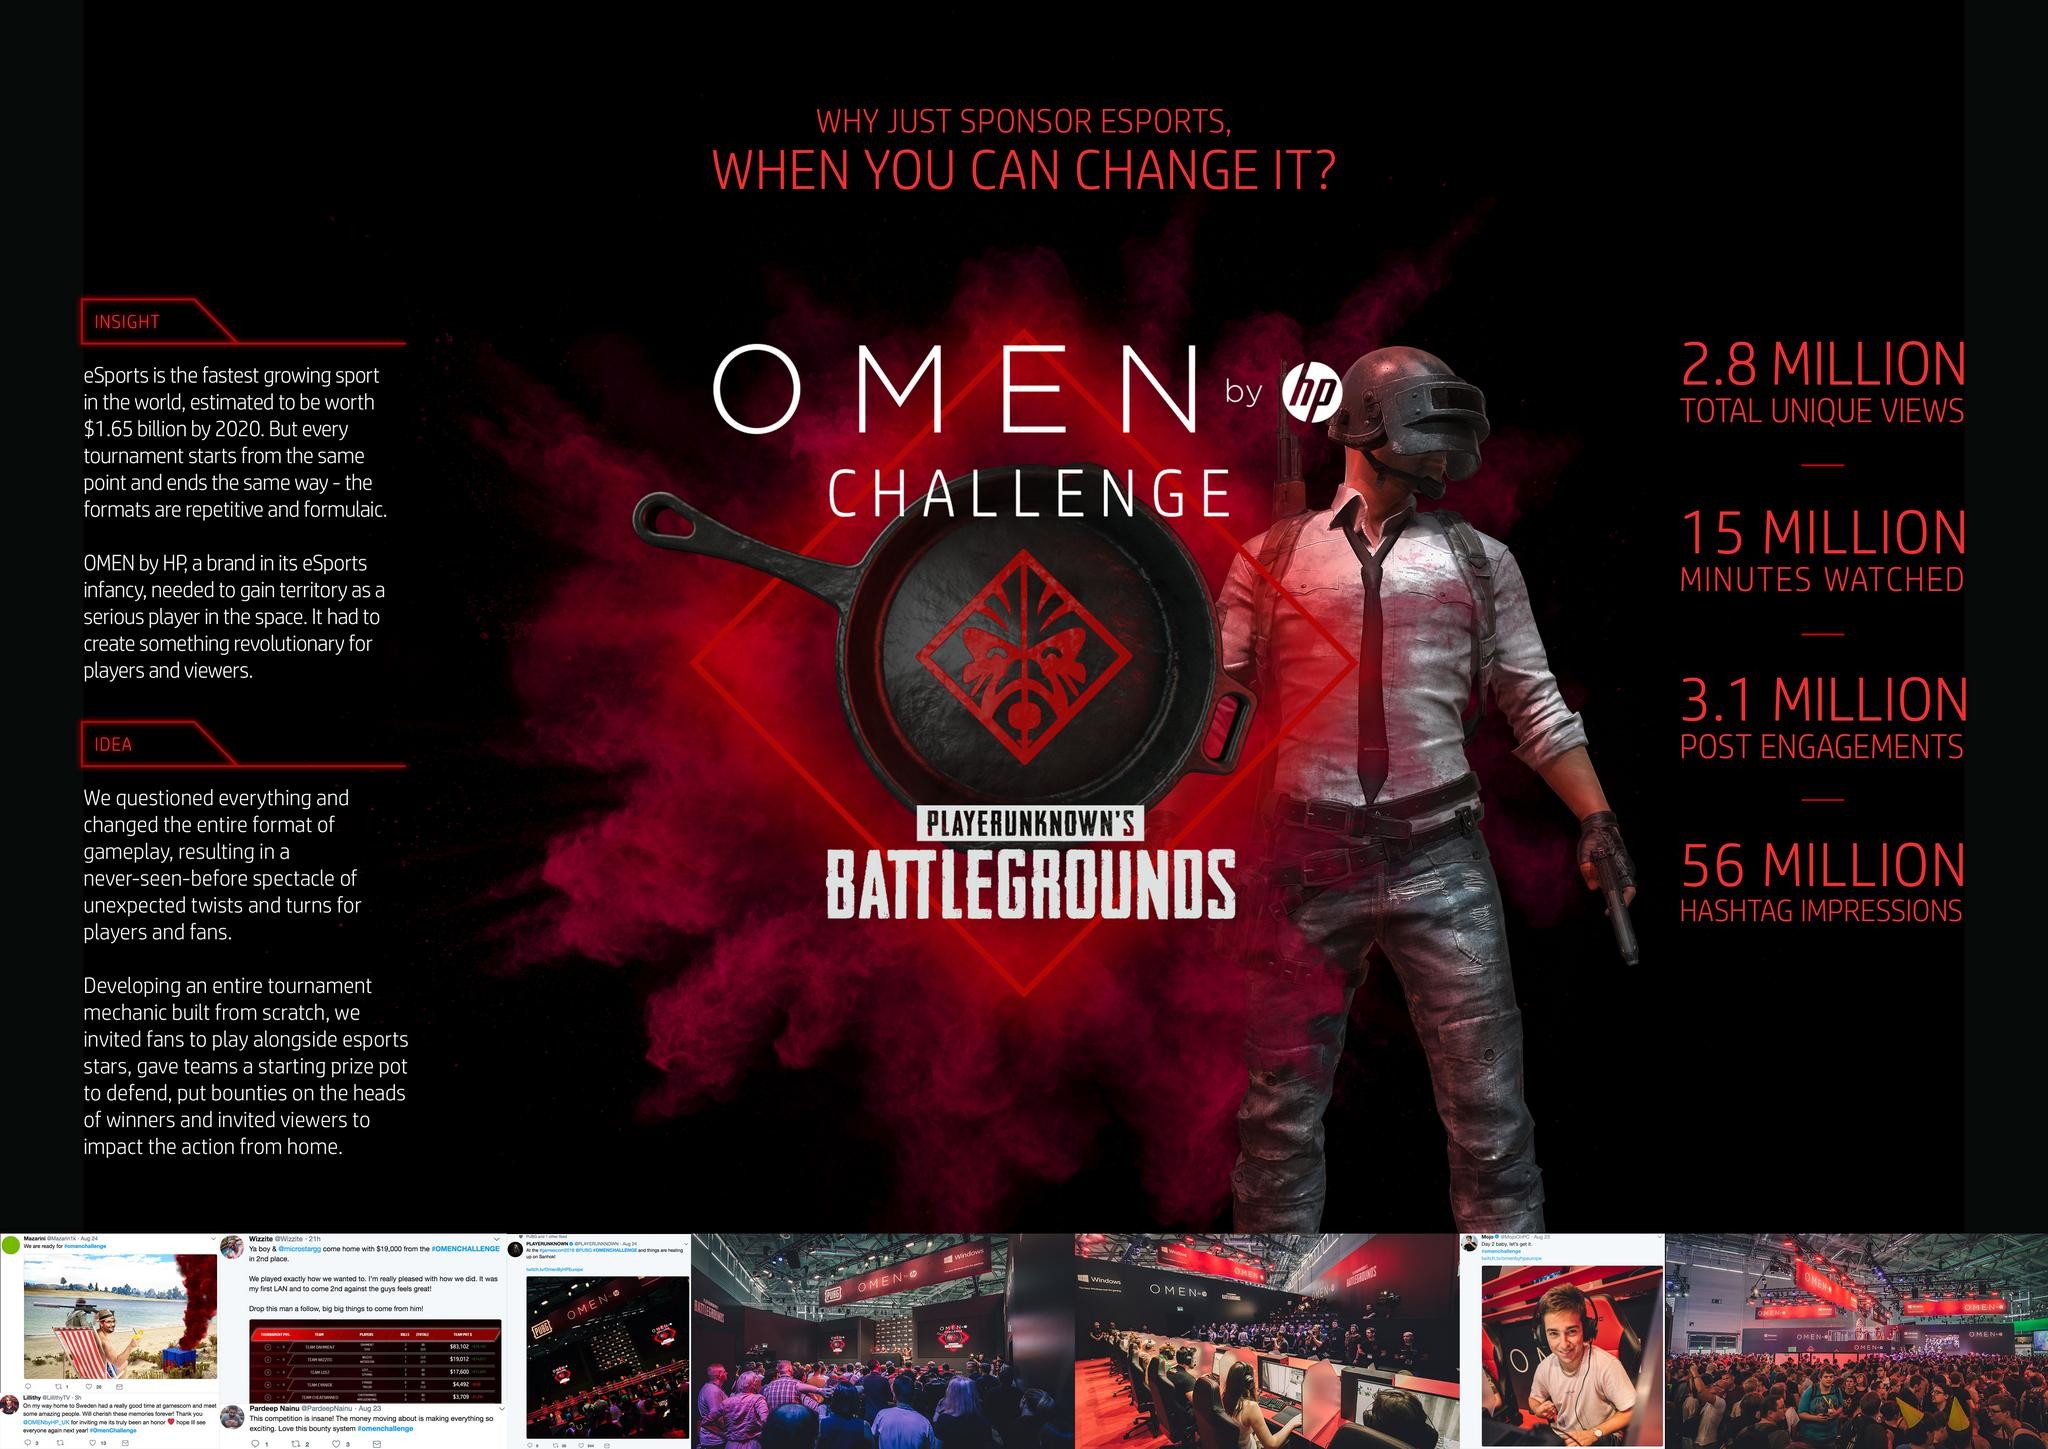 The OMEN by HP Challenge